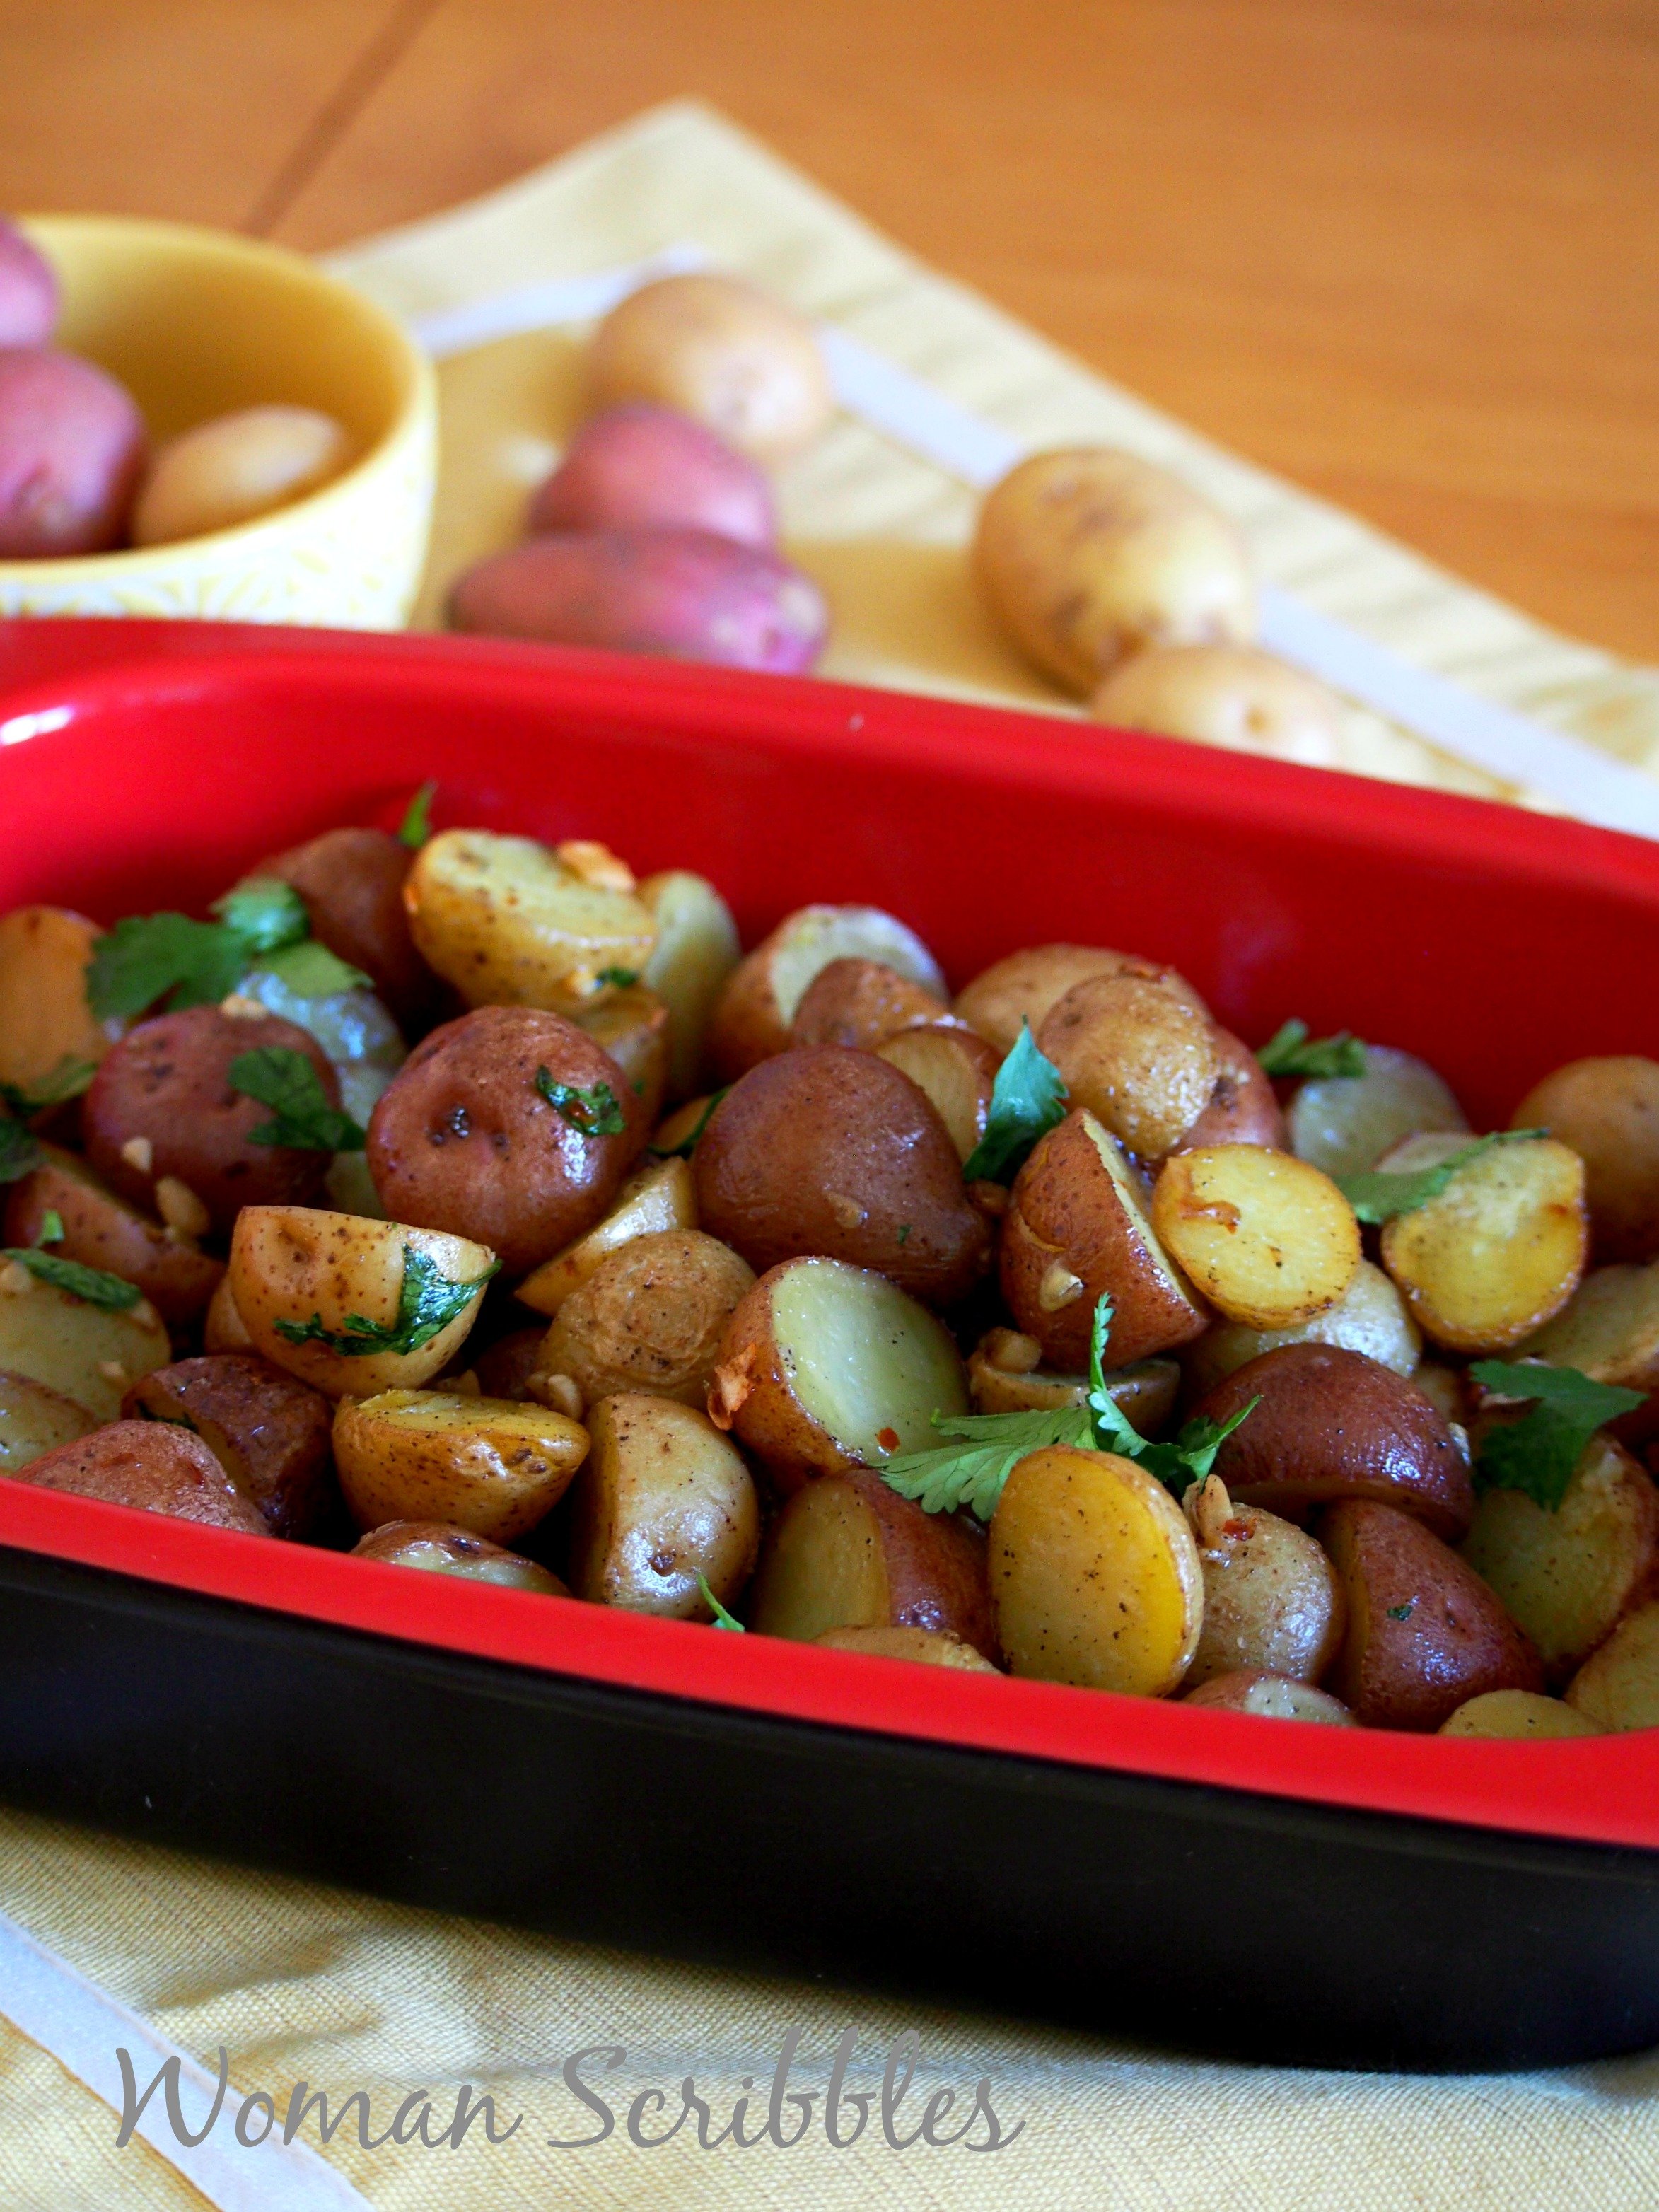 This roasted mini potatoes is an easy dish to prepare but it packs amazing flavor of garlic in a simple, one baking dish entree.